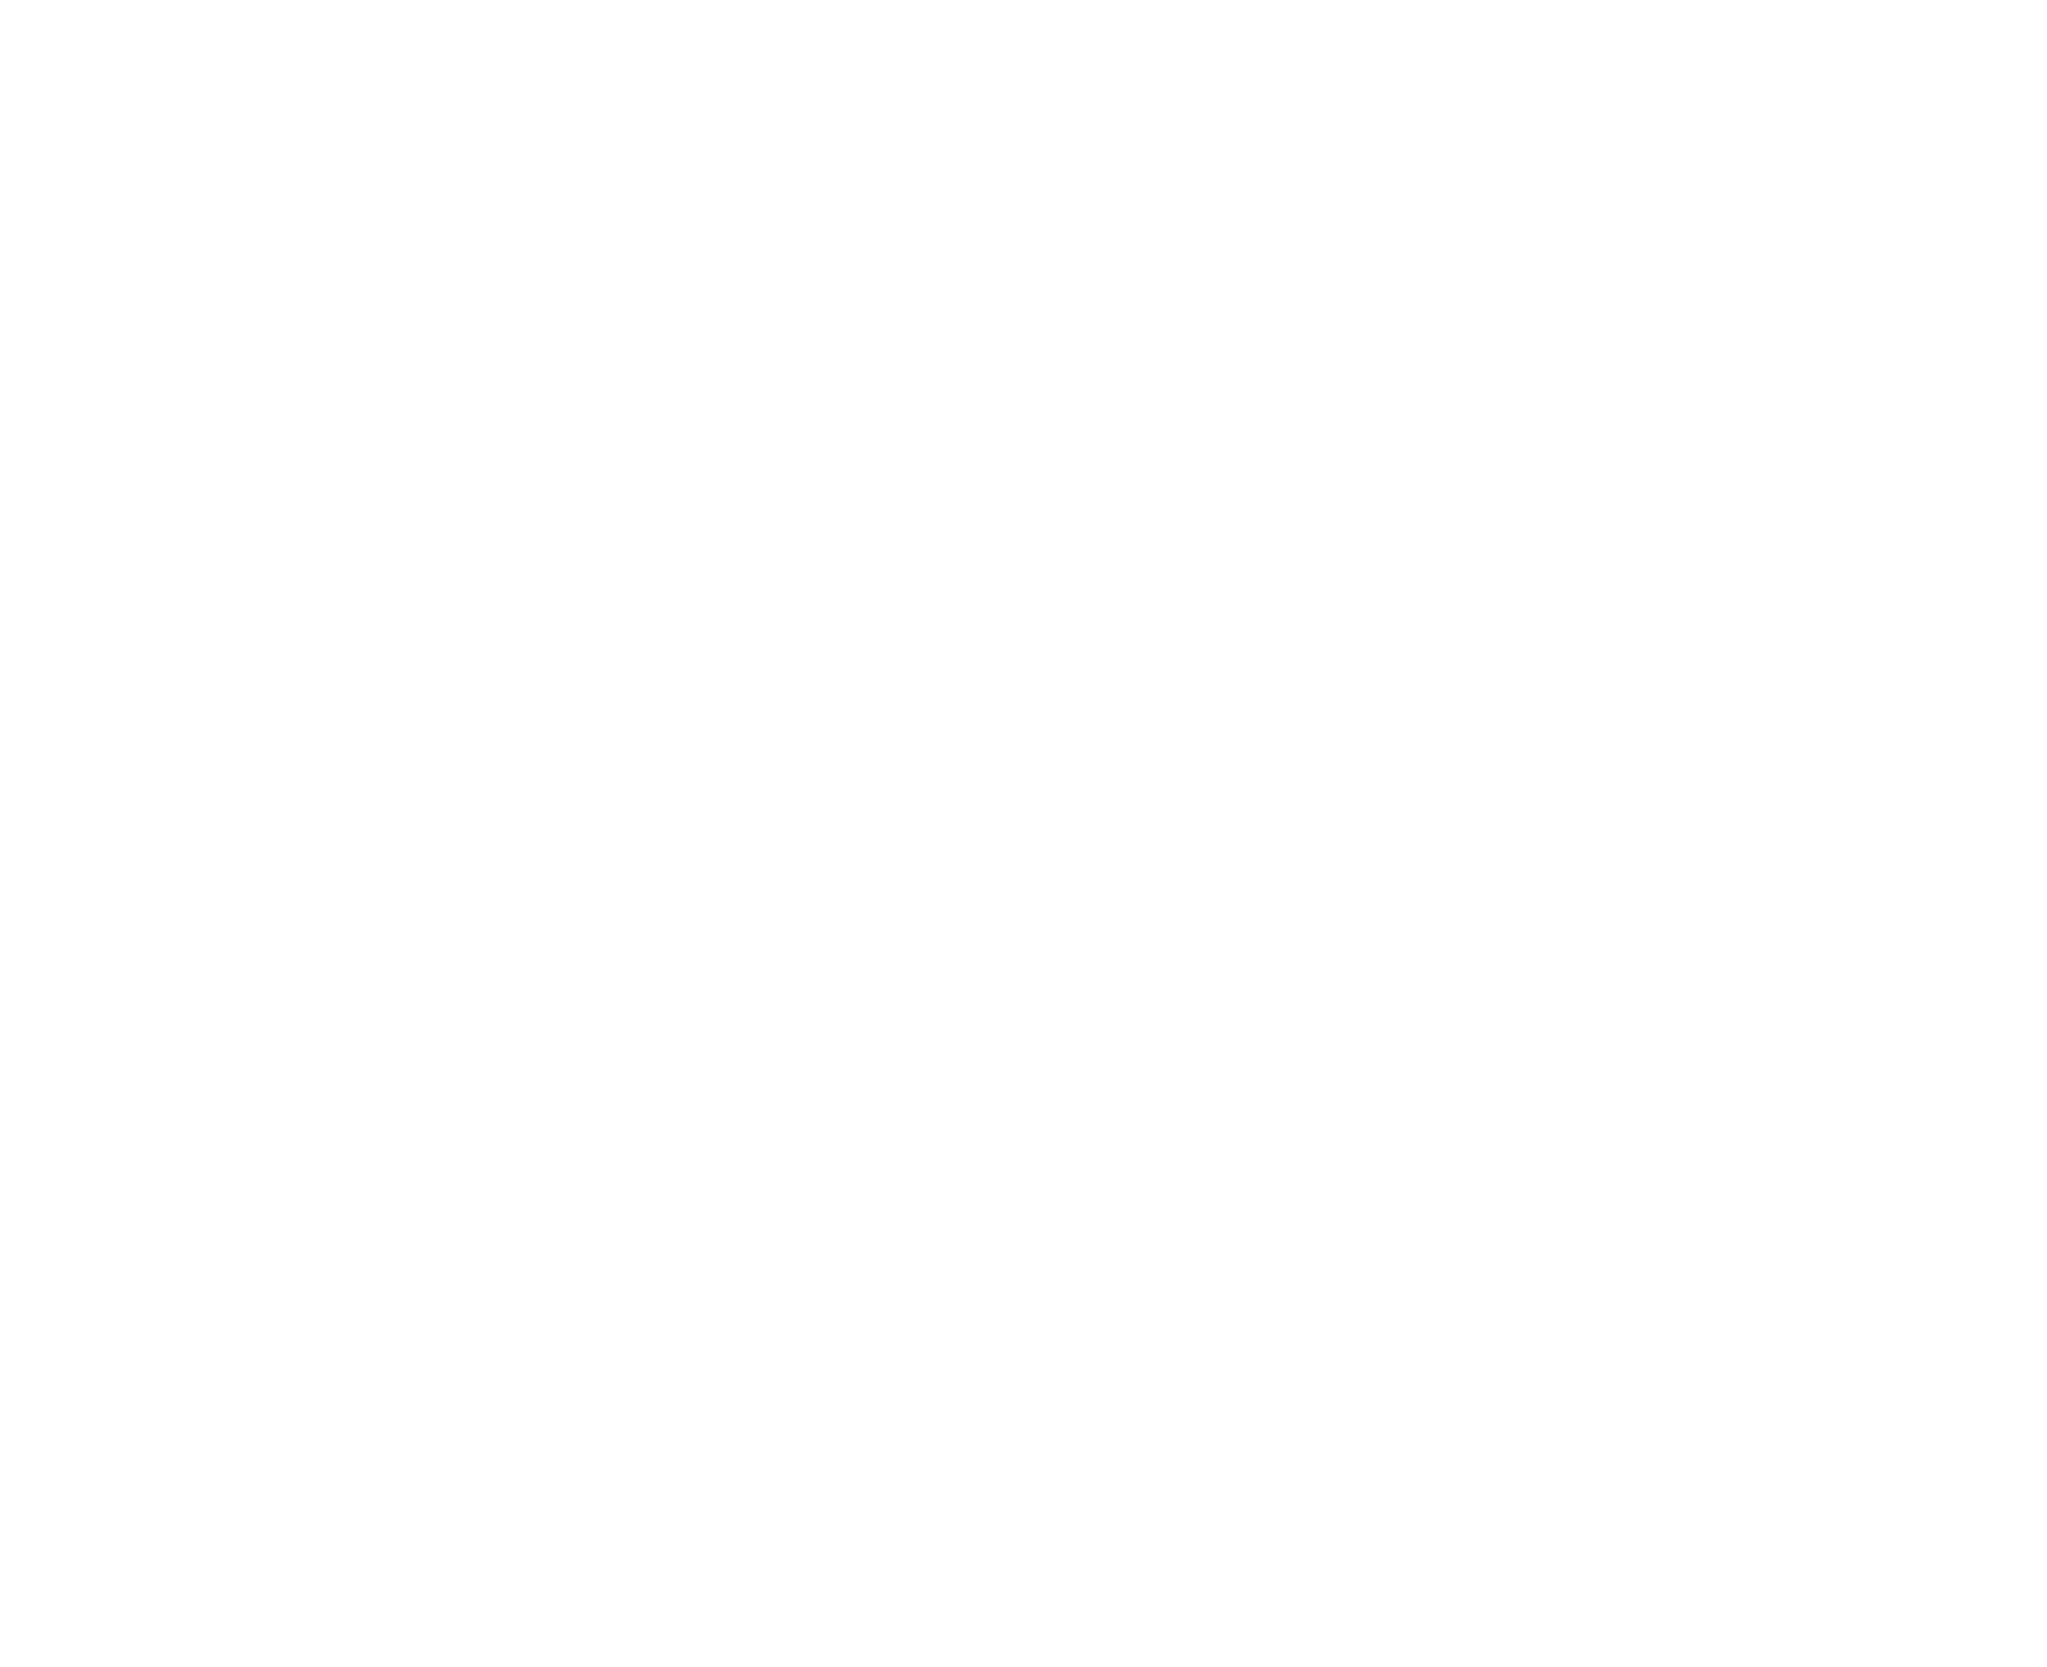 A rough, hand-drawn architecture diagram of the TypeScript codebase